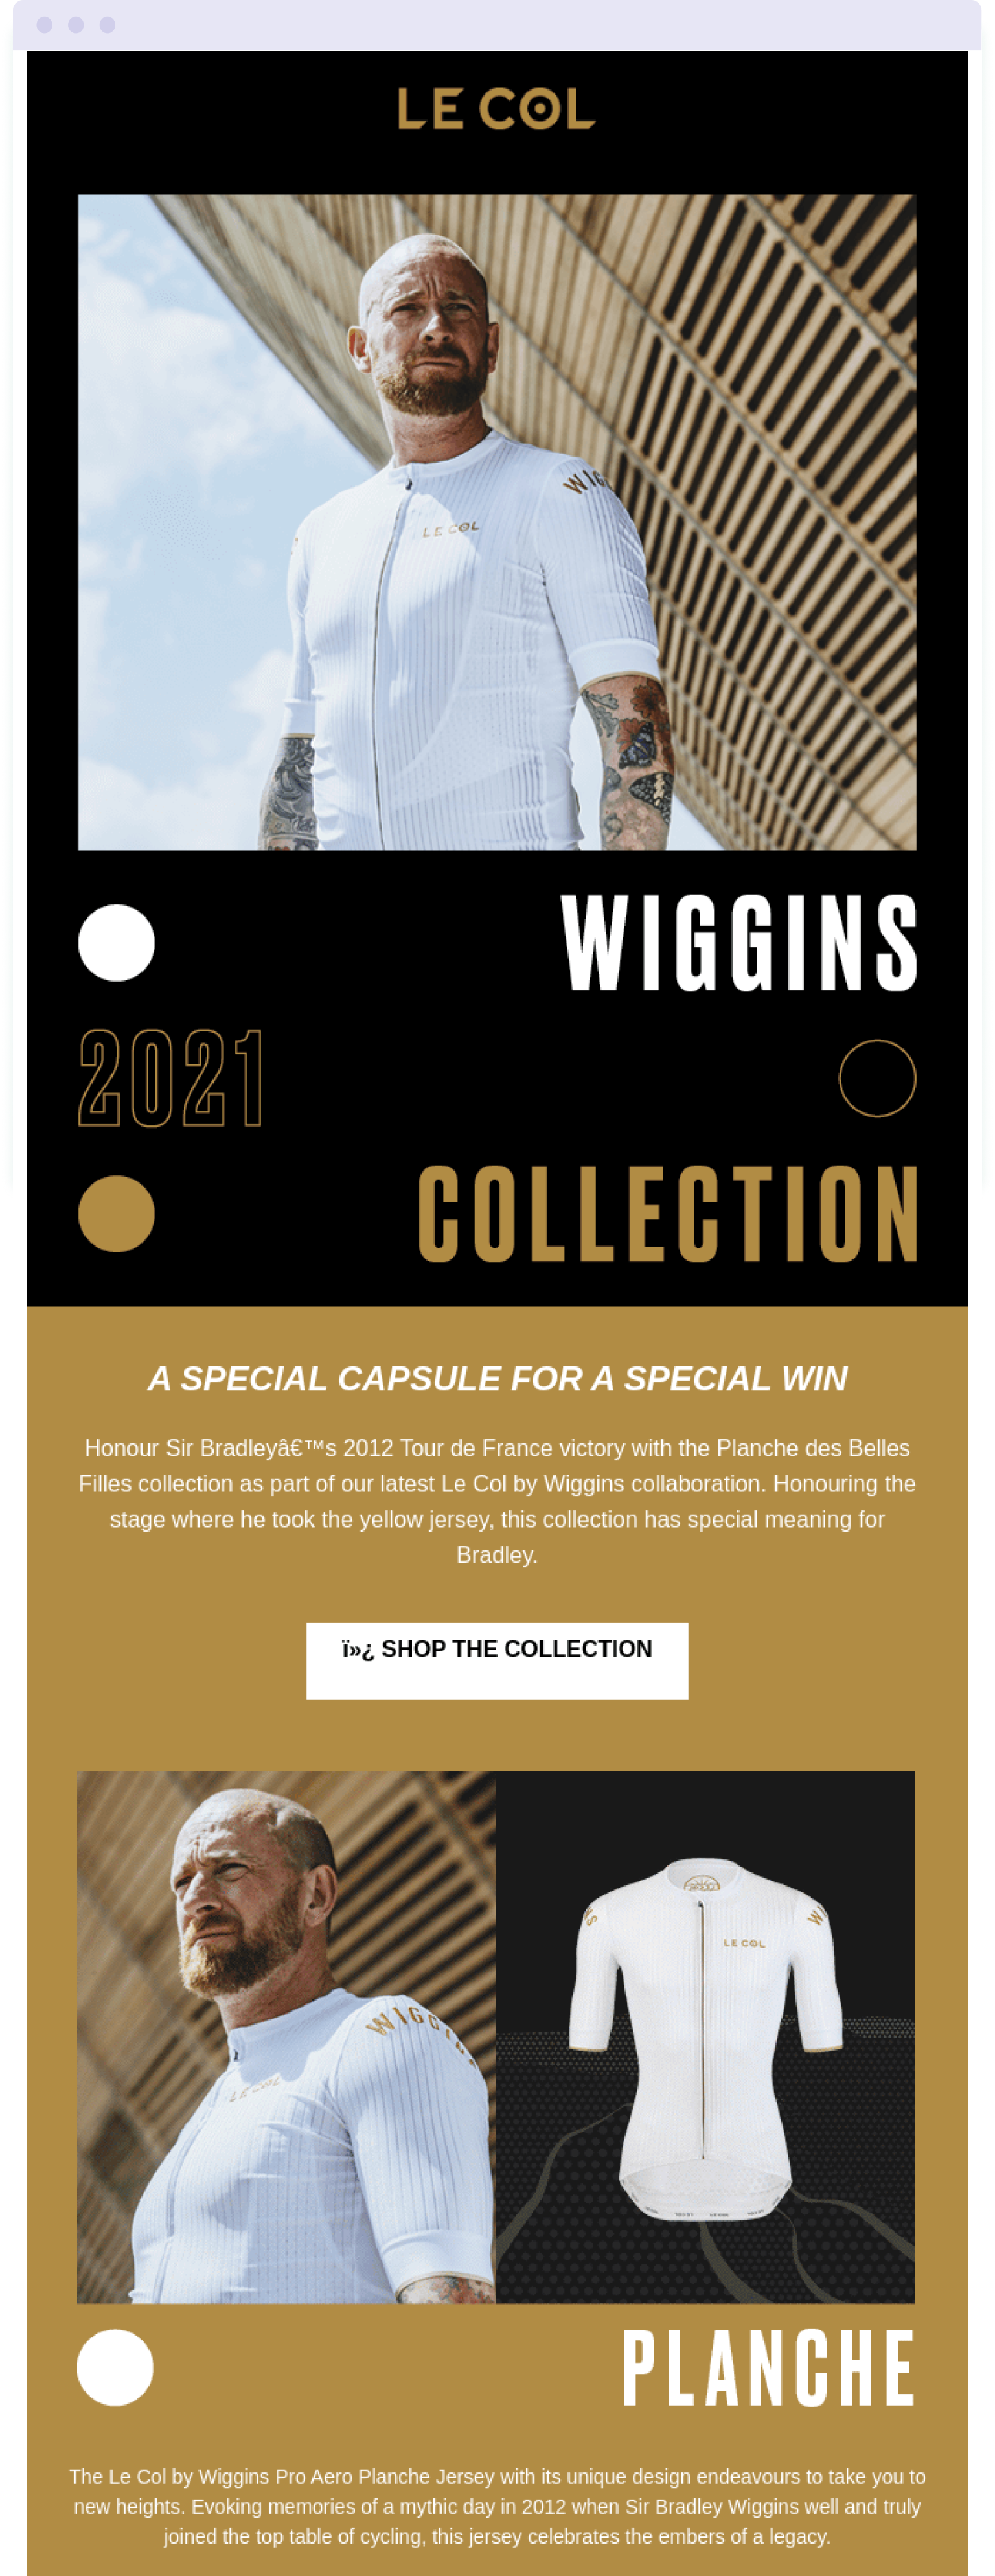 Example of a collaboration between the cycling brand Le Col and Bradley Wiggins